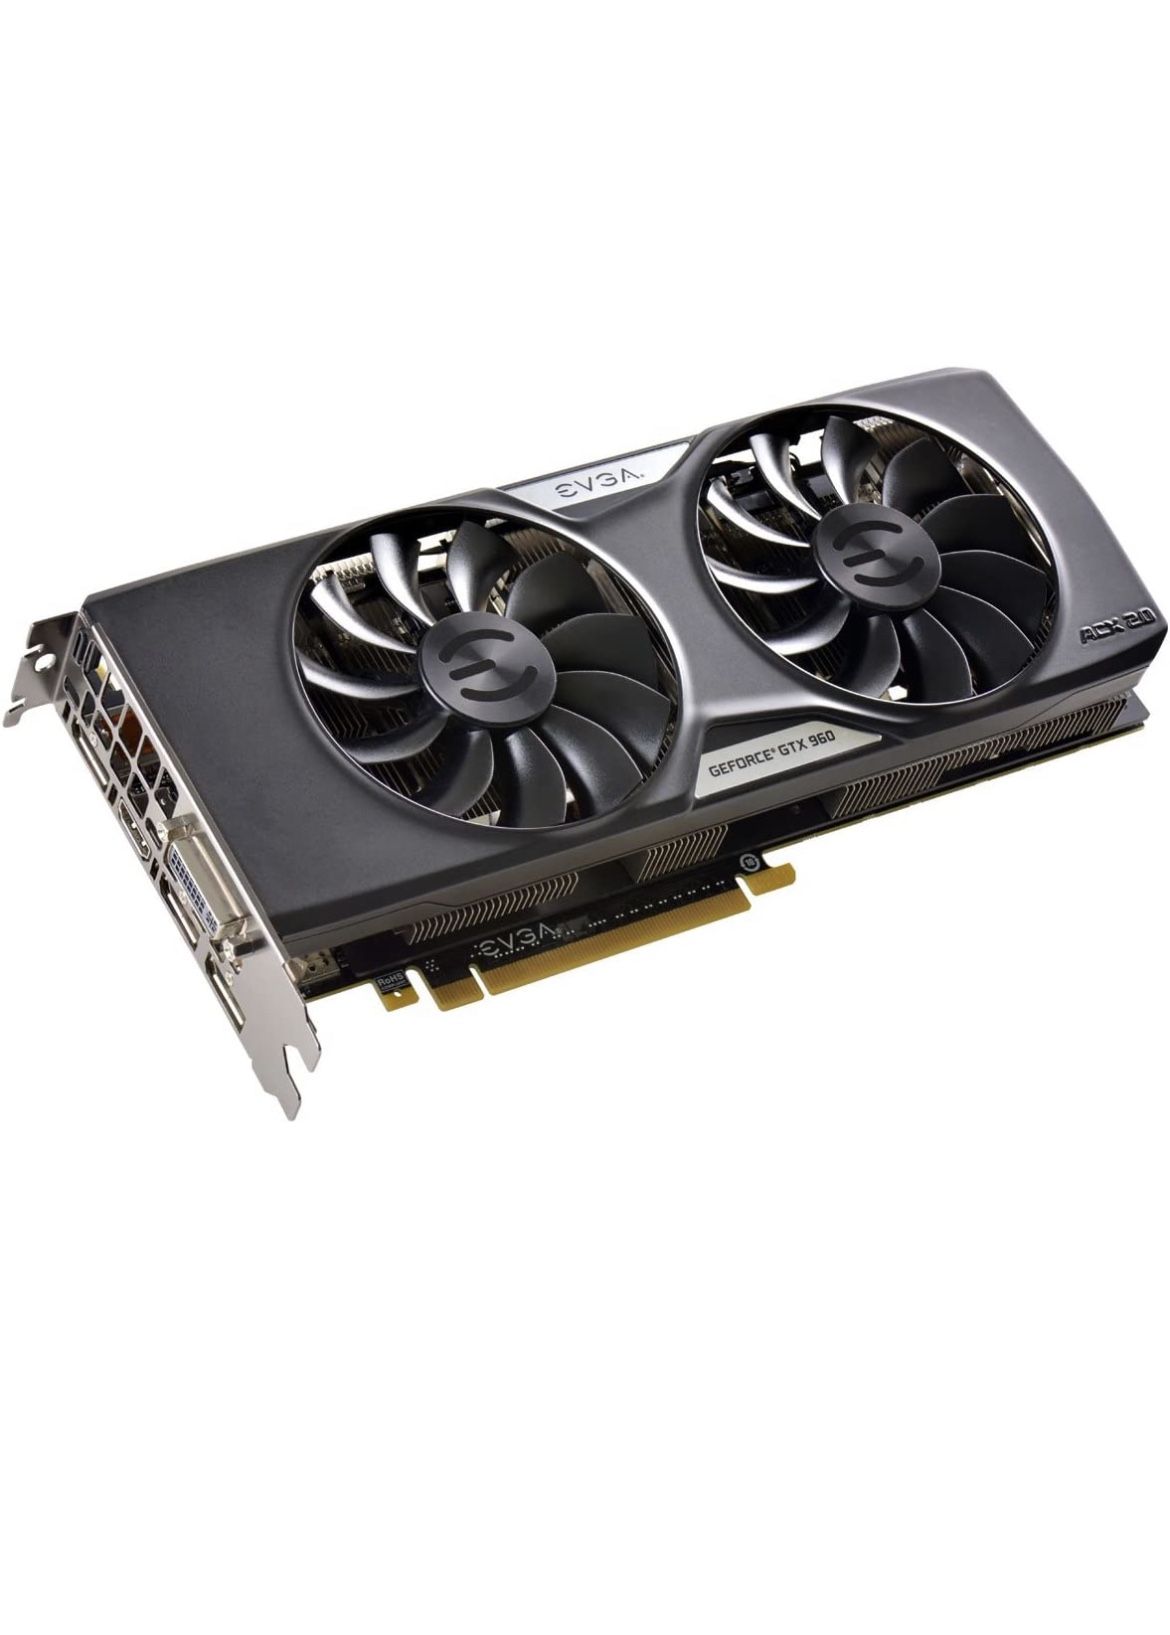 EVGA GeForce GTX 960 4GB FTW GAMING Dual Fan And Backplate